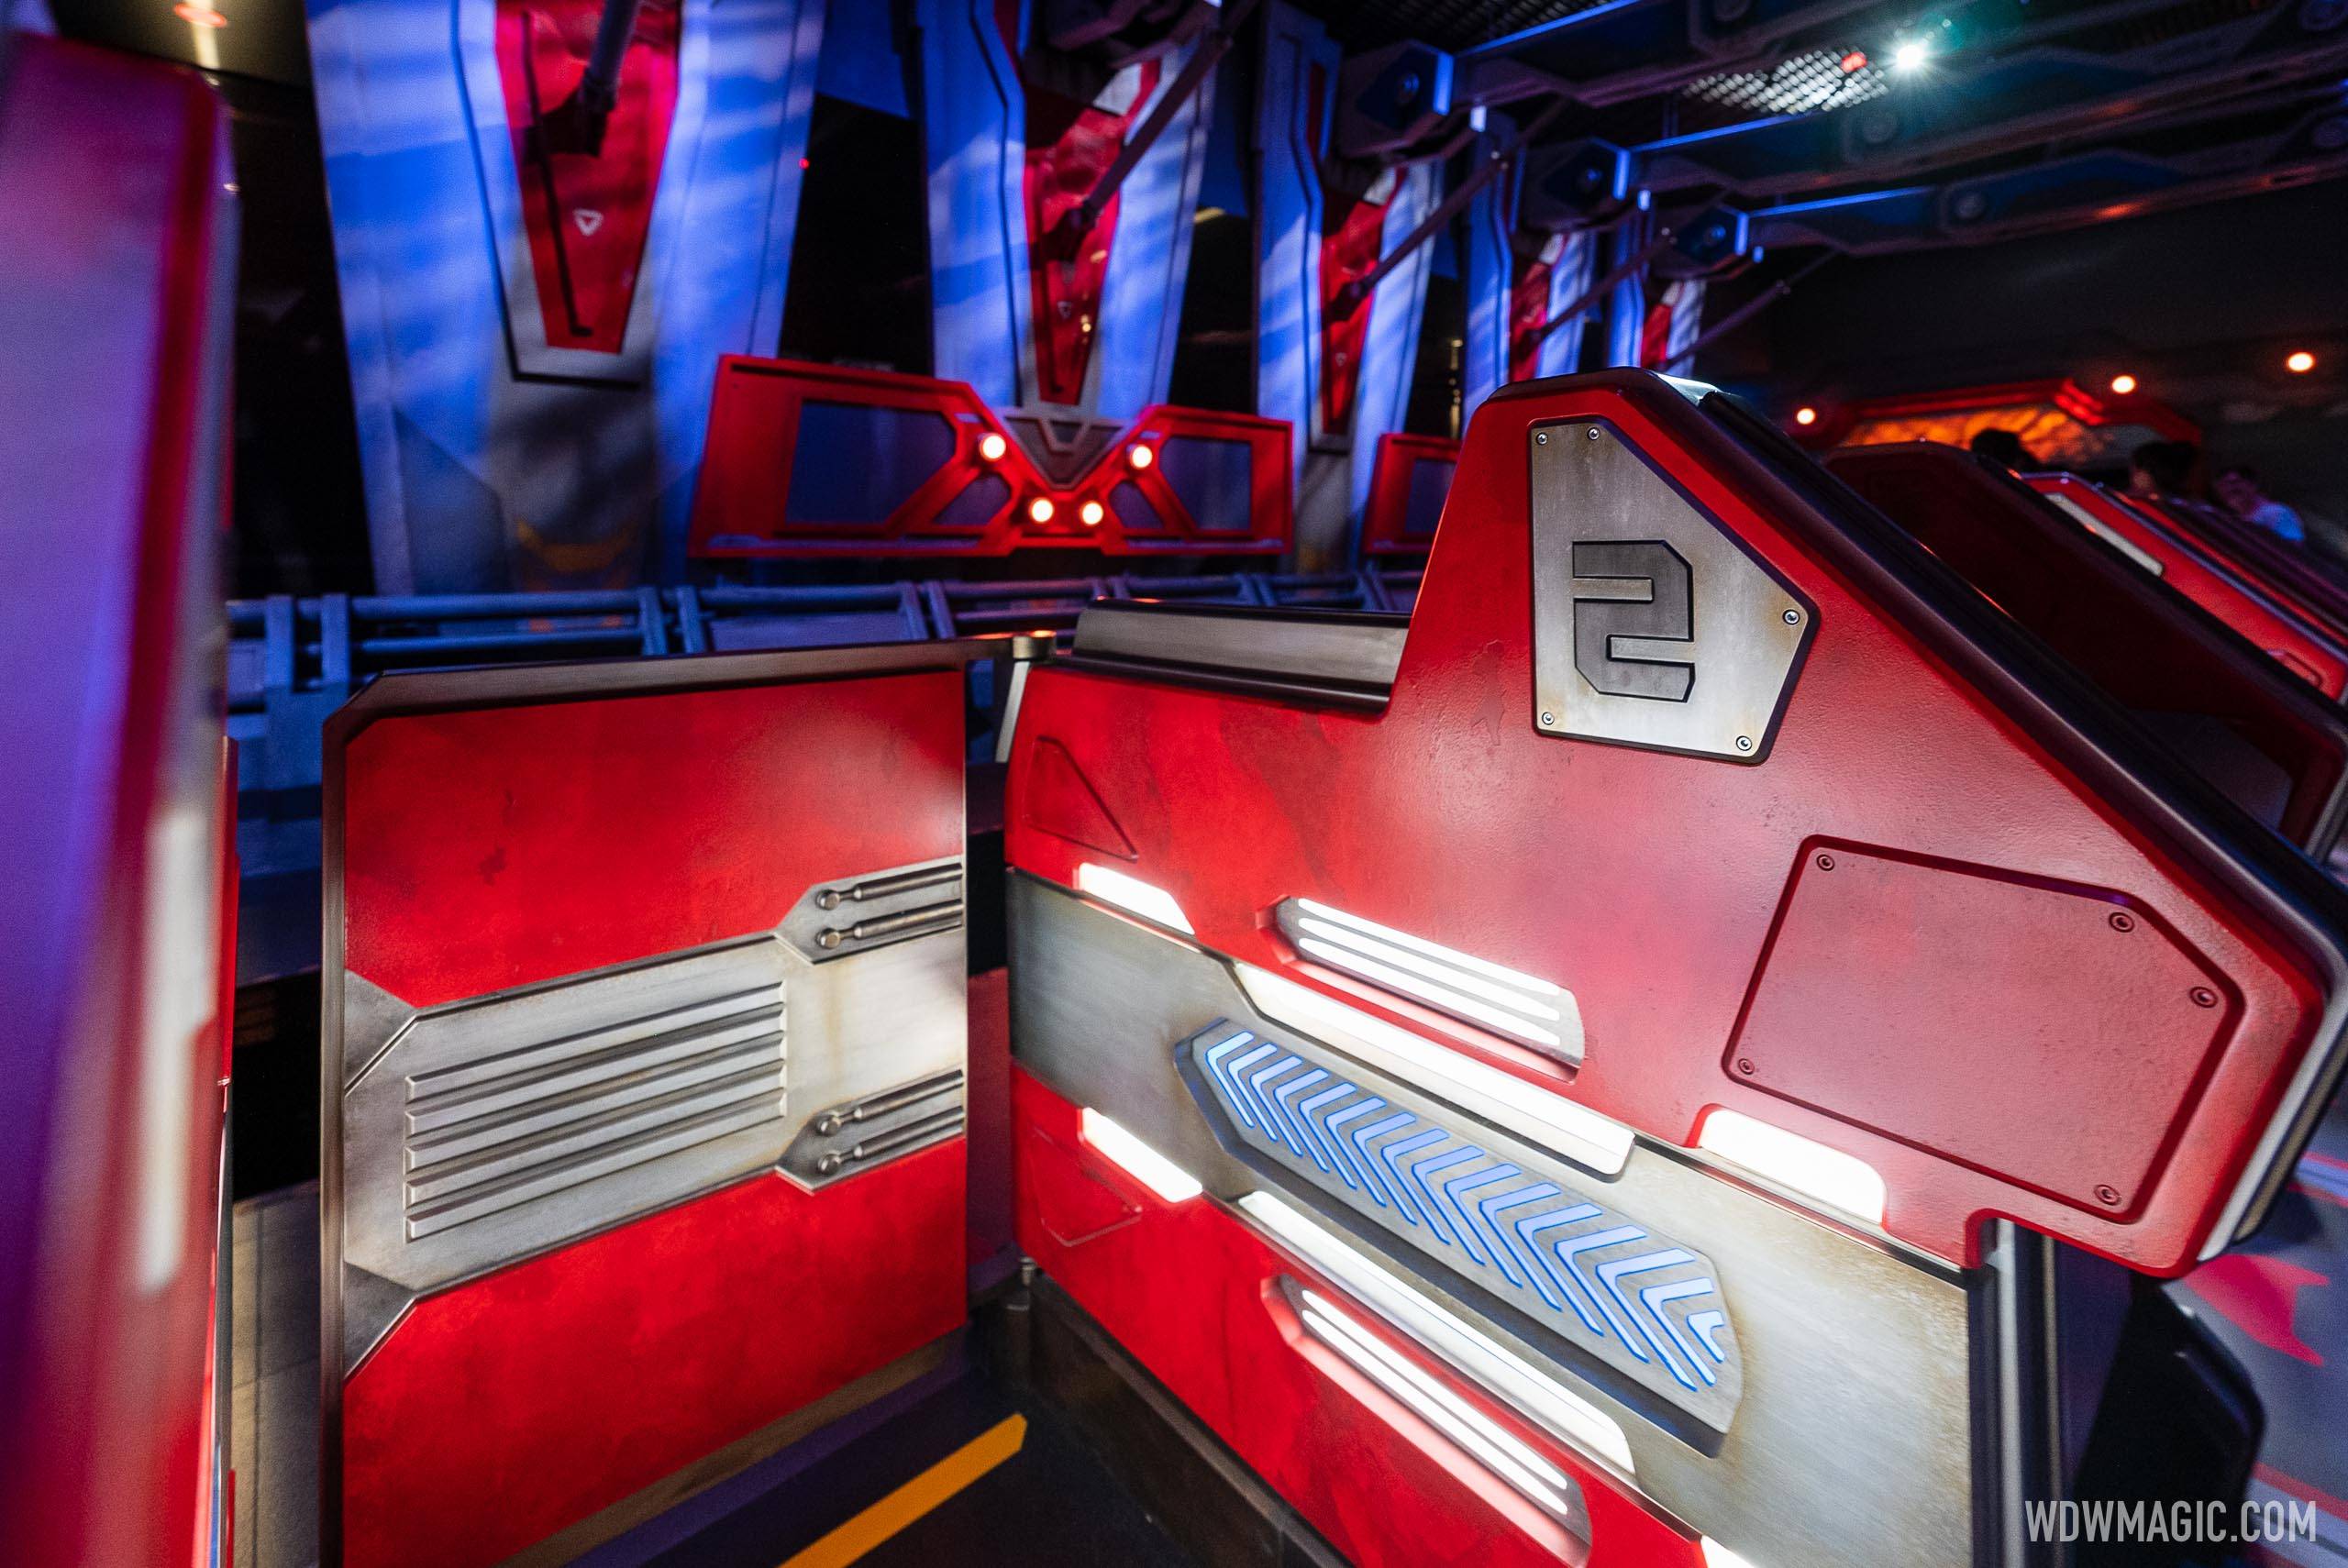 Guardians of the Galaxy Cosmic Rewind complete walk-through and tour